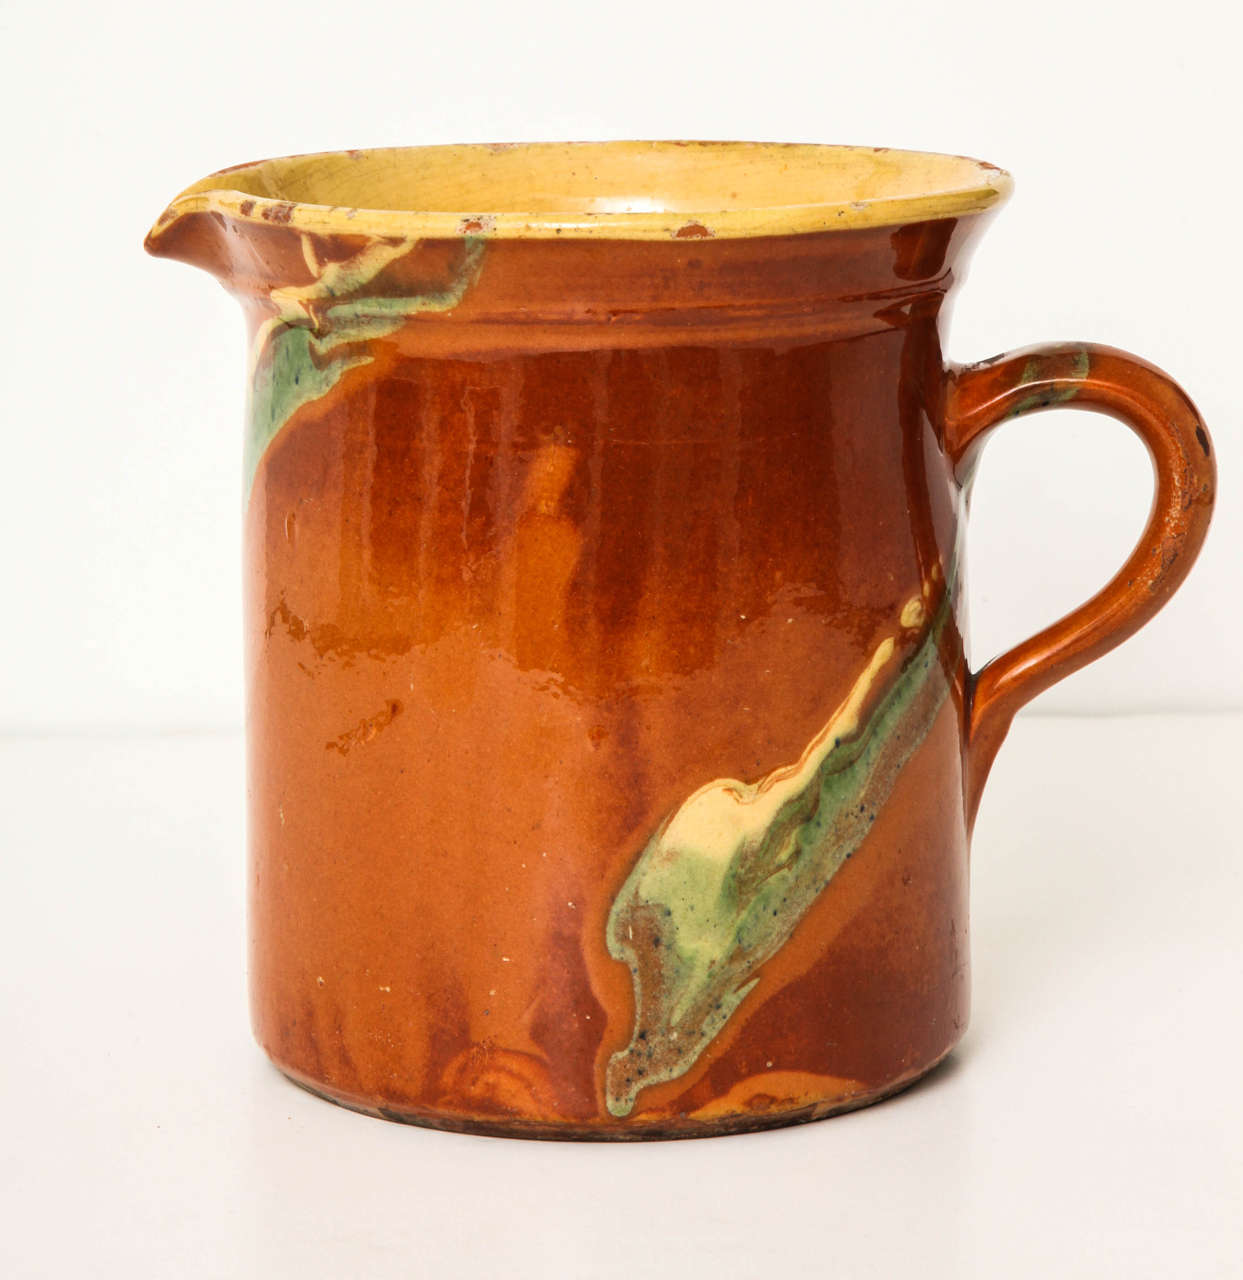 A 19th century French Jaspe pitcher with dripped polychrome decoration